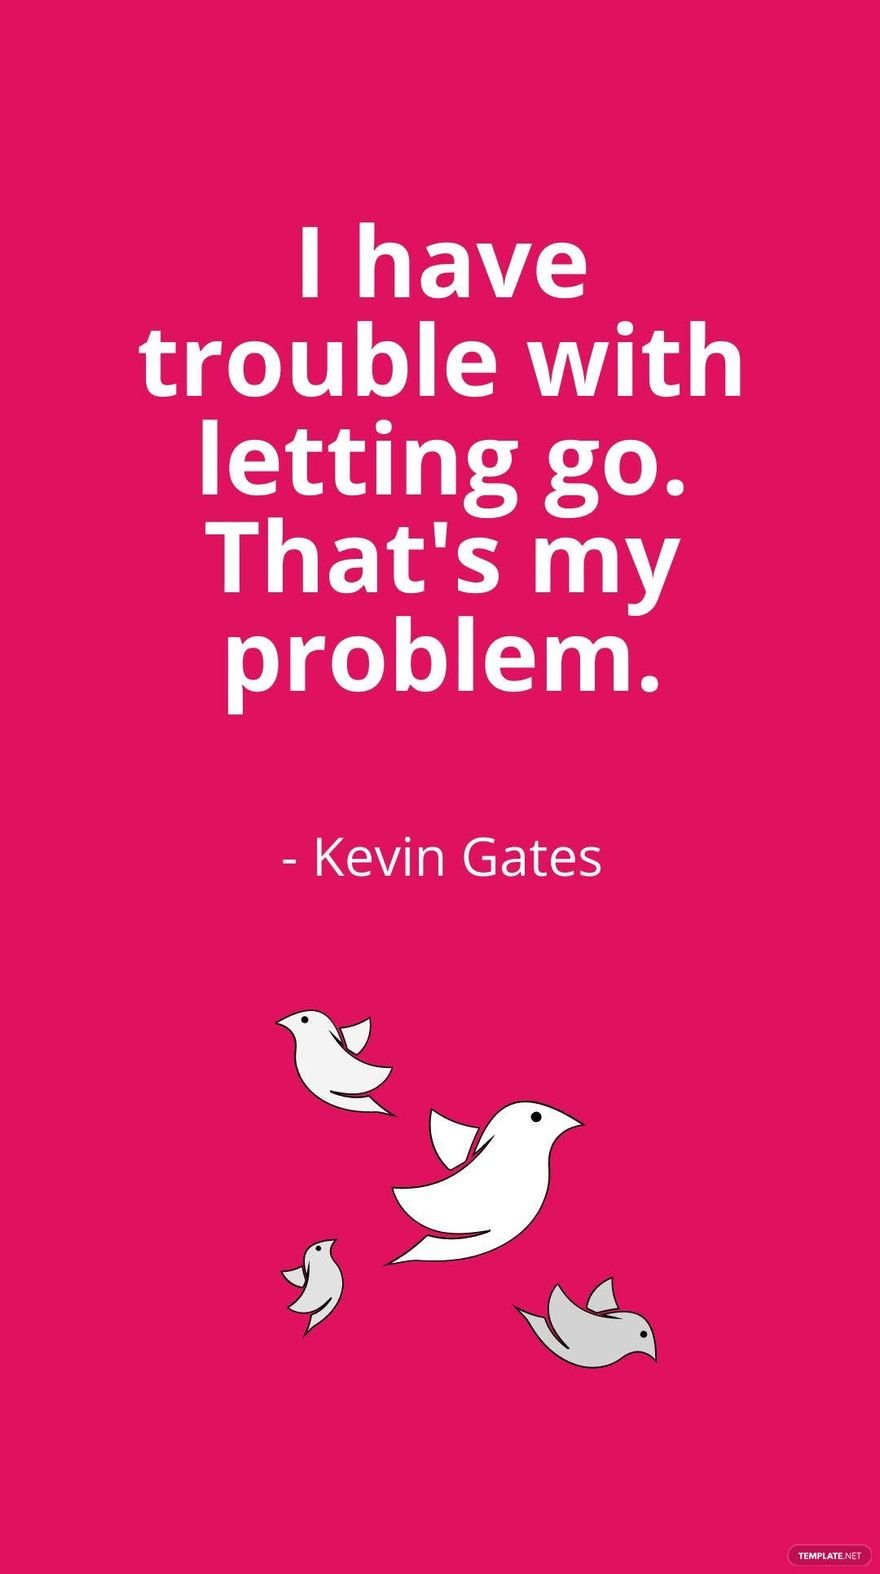 Free Kevin Gates - I have trouble with letting go. That's my problem. in JPG